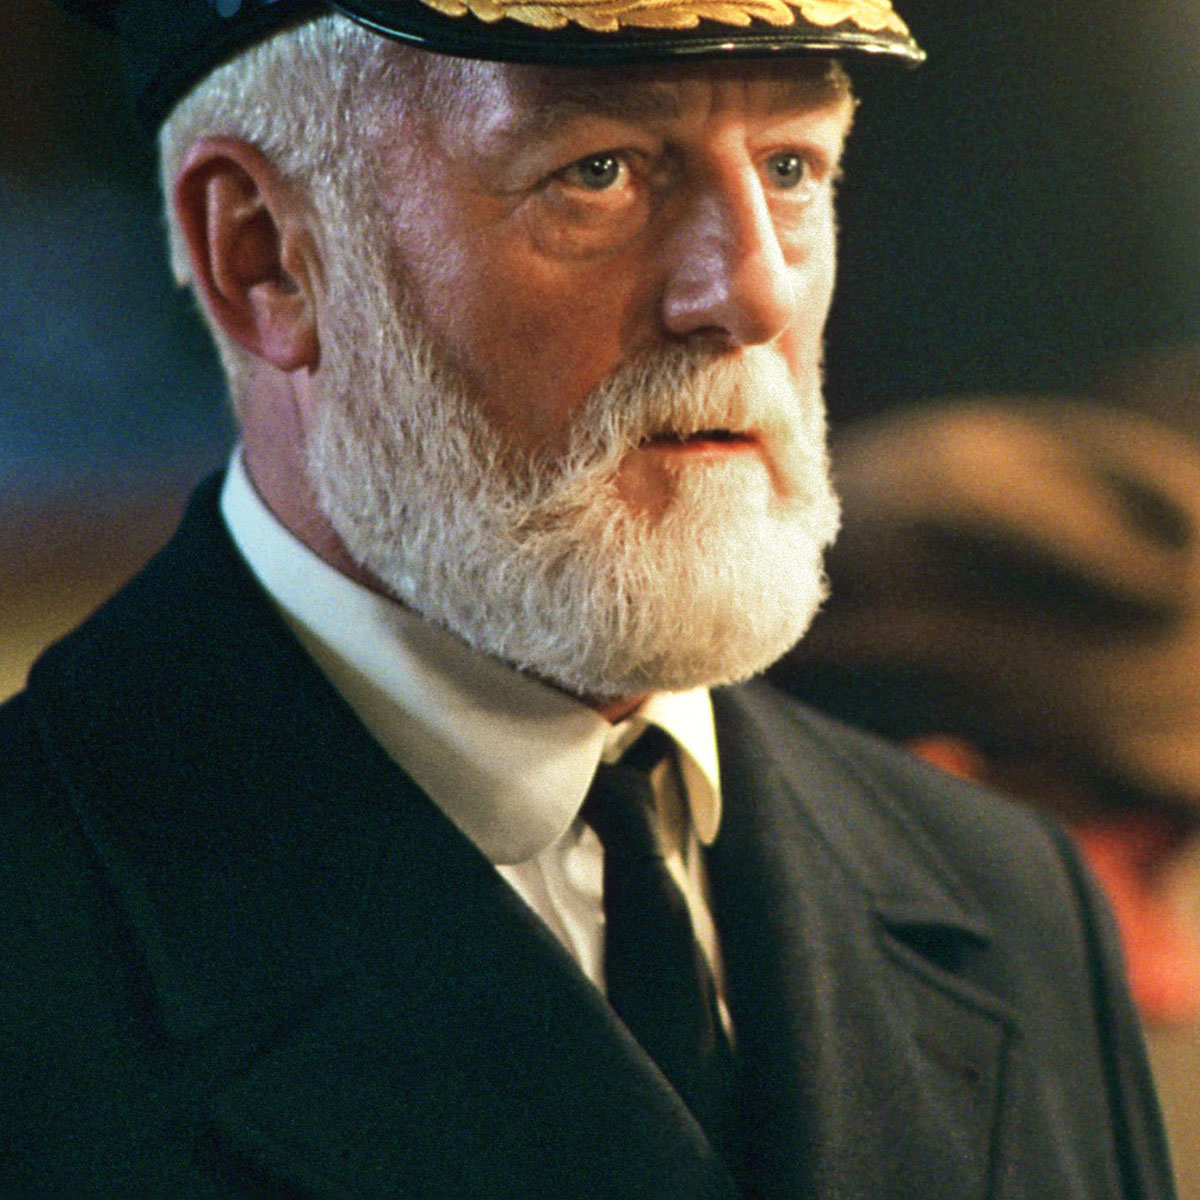 Bernard Hill, actor of Titanic and LOTR, dead at 79